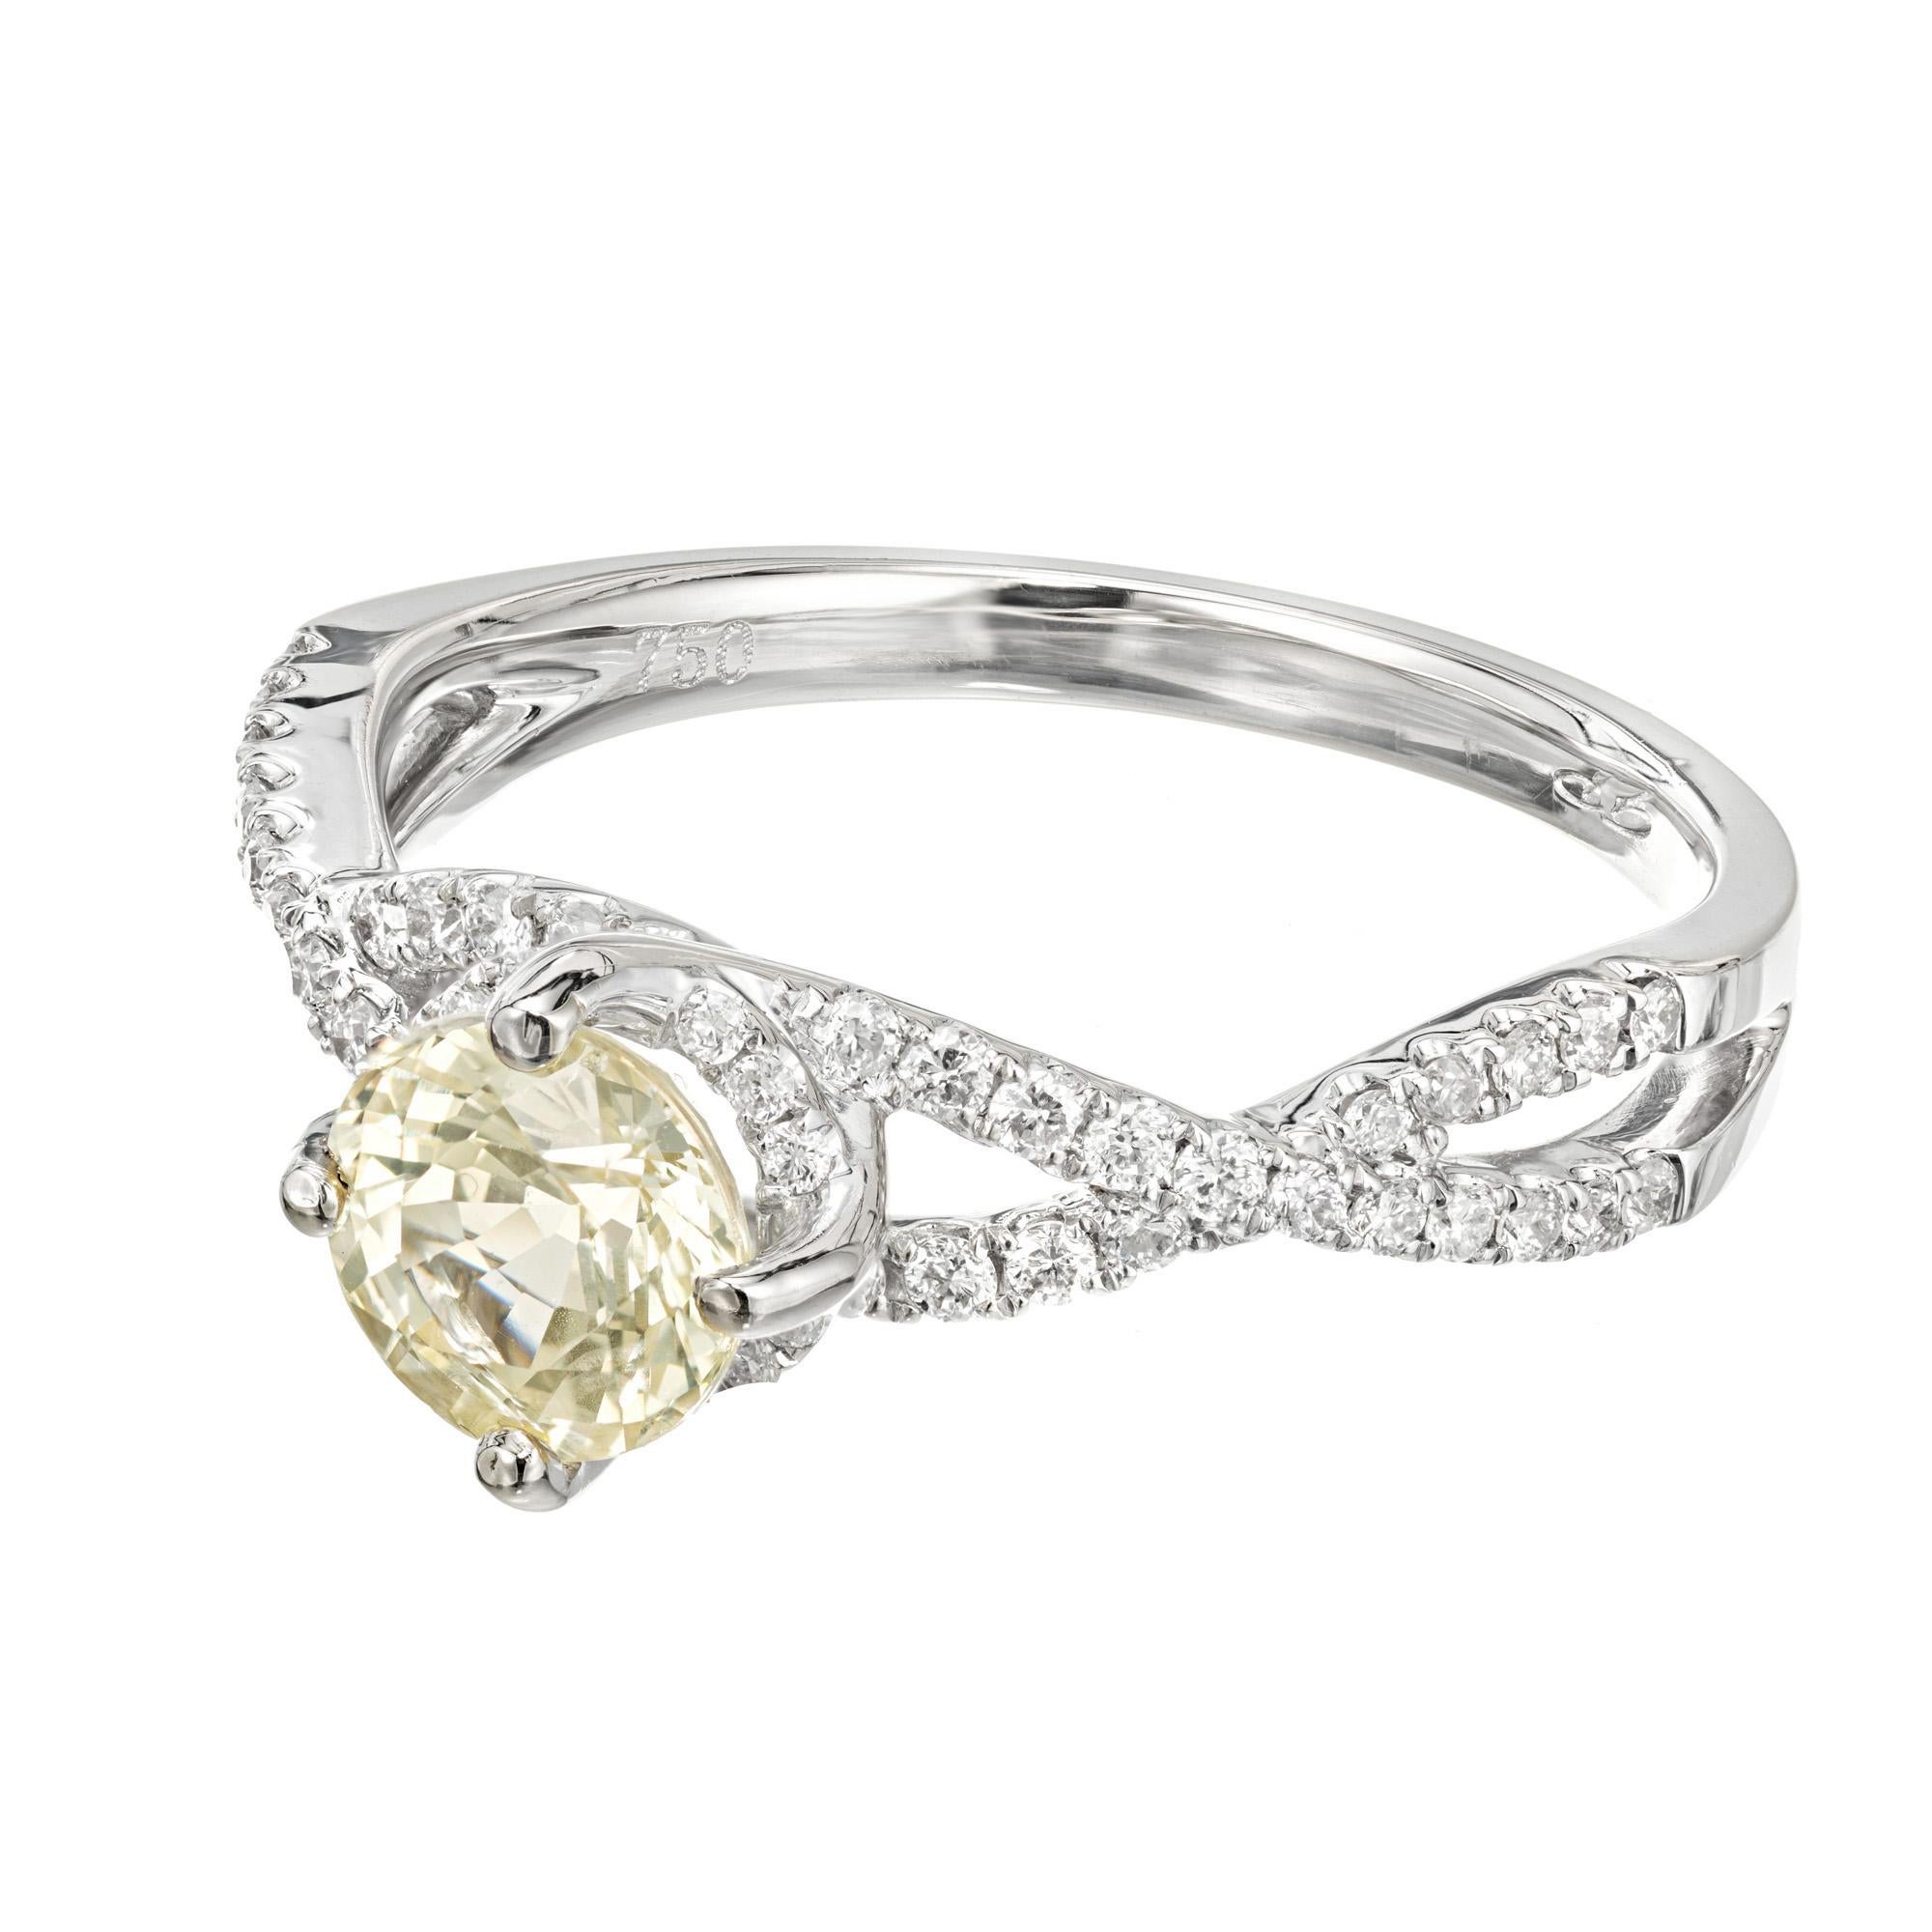 Natural light yellow sapphire and diamond engagement ring. GIA certified natural no heat light yellow center Sapphire, set in an 18k white gold swirl setting with 54 round accent diamonds. 

1 round light yellow Sapphire, approx. total weight